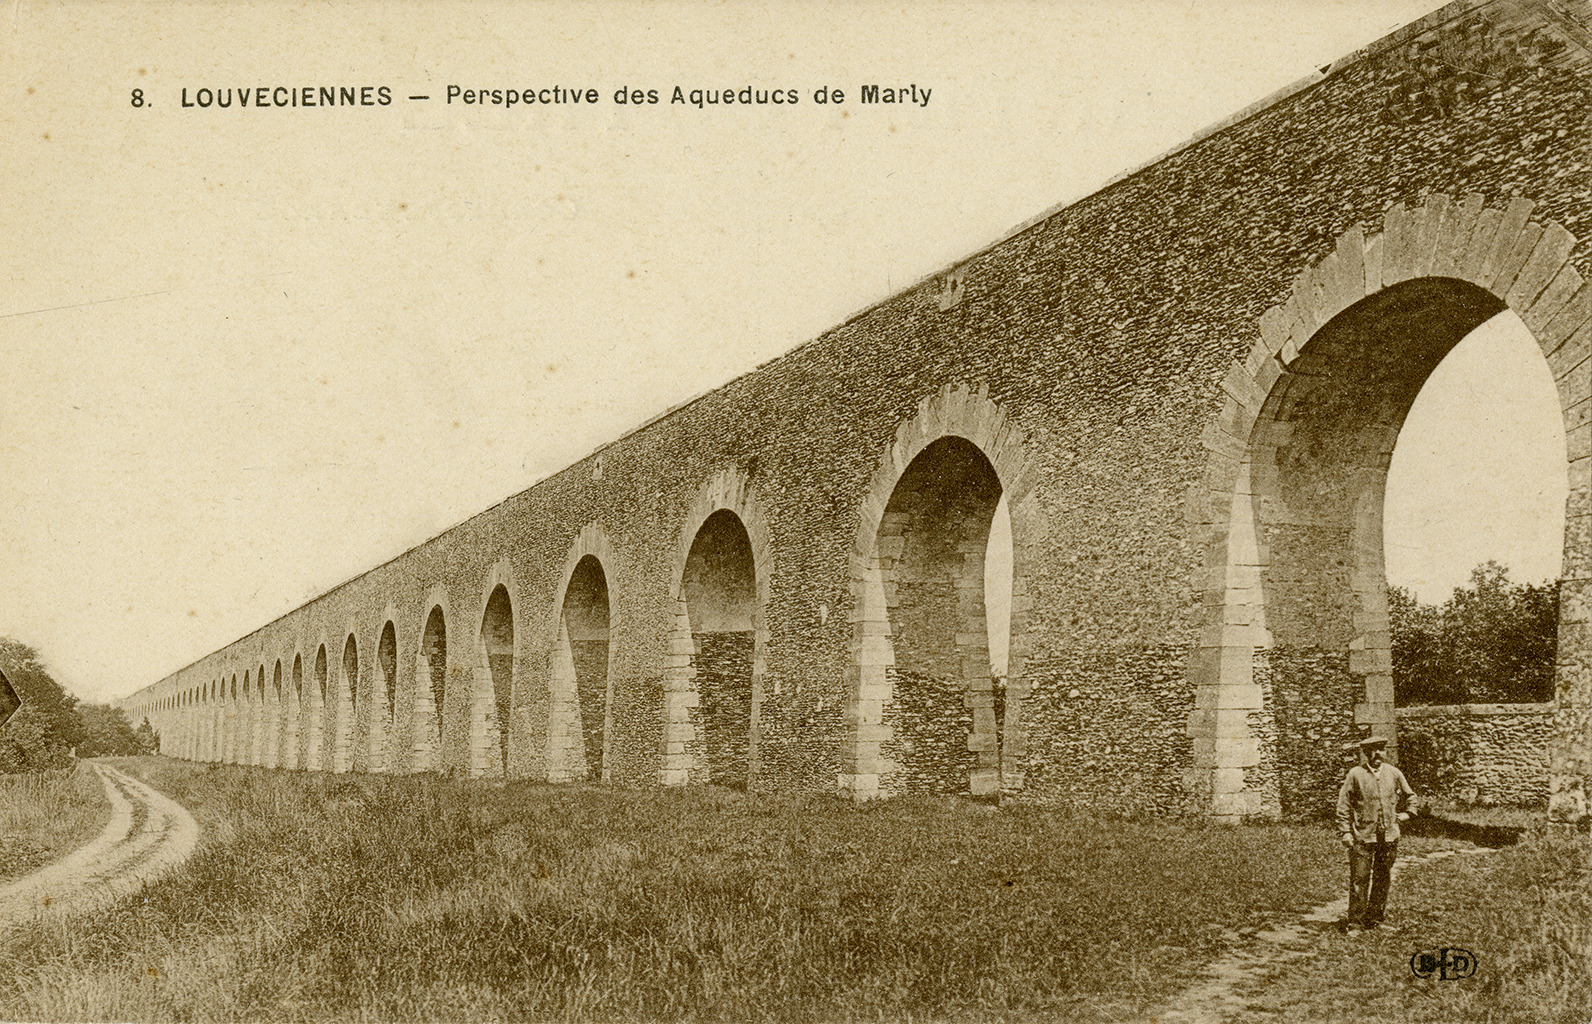 A sepia-toned photograph of a man standing in a grass field next to a towering wall made of cobblestone that has dozens of archways.